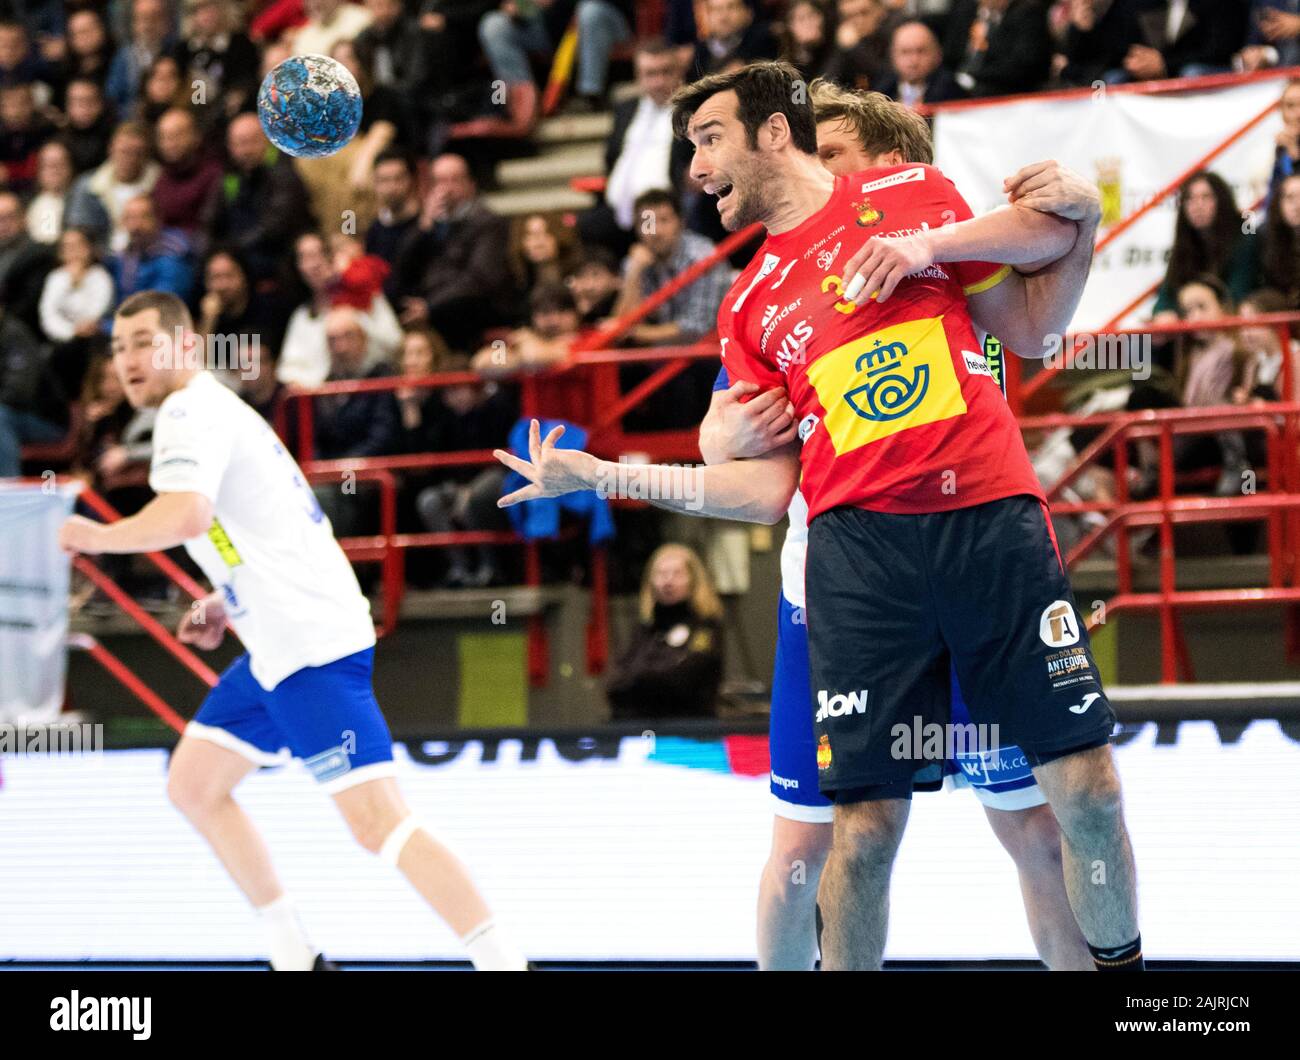 Torrelavega, Spain. 5th January, 2020. Gedeon Guardiola (Spain) passes the ball while is grabbed by Pavel Atman (Russia) during handball match of International Memory 'Domingo Barcenas' between Spain and Russia at Sports Center Vicente Trueba on January 5, 2020 in Torrelavega, Spain. © David Gato/Alamy Live News Stock Photo